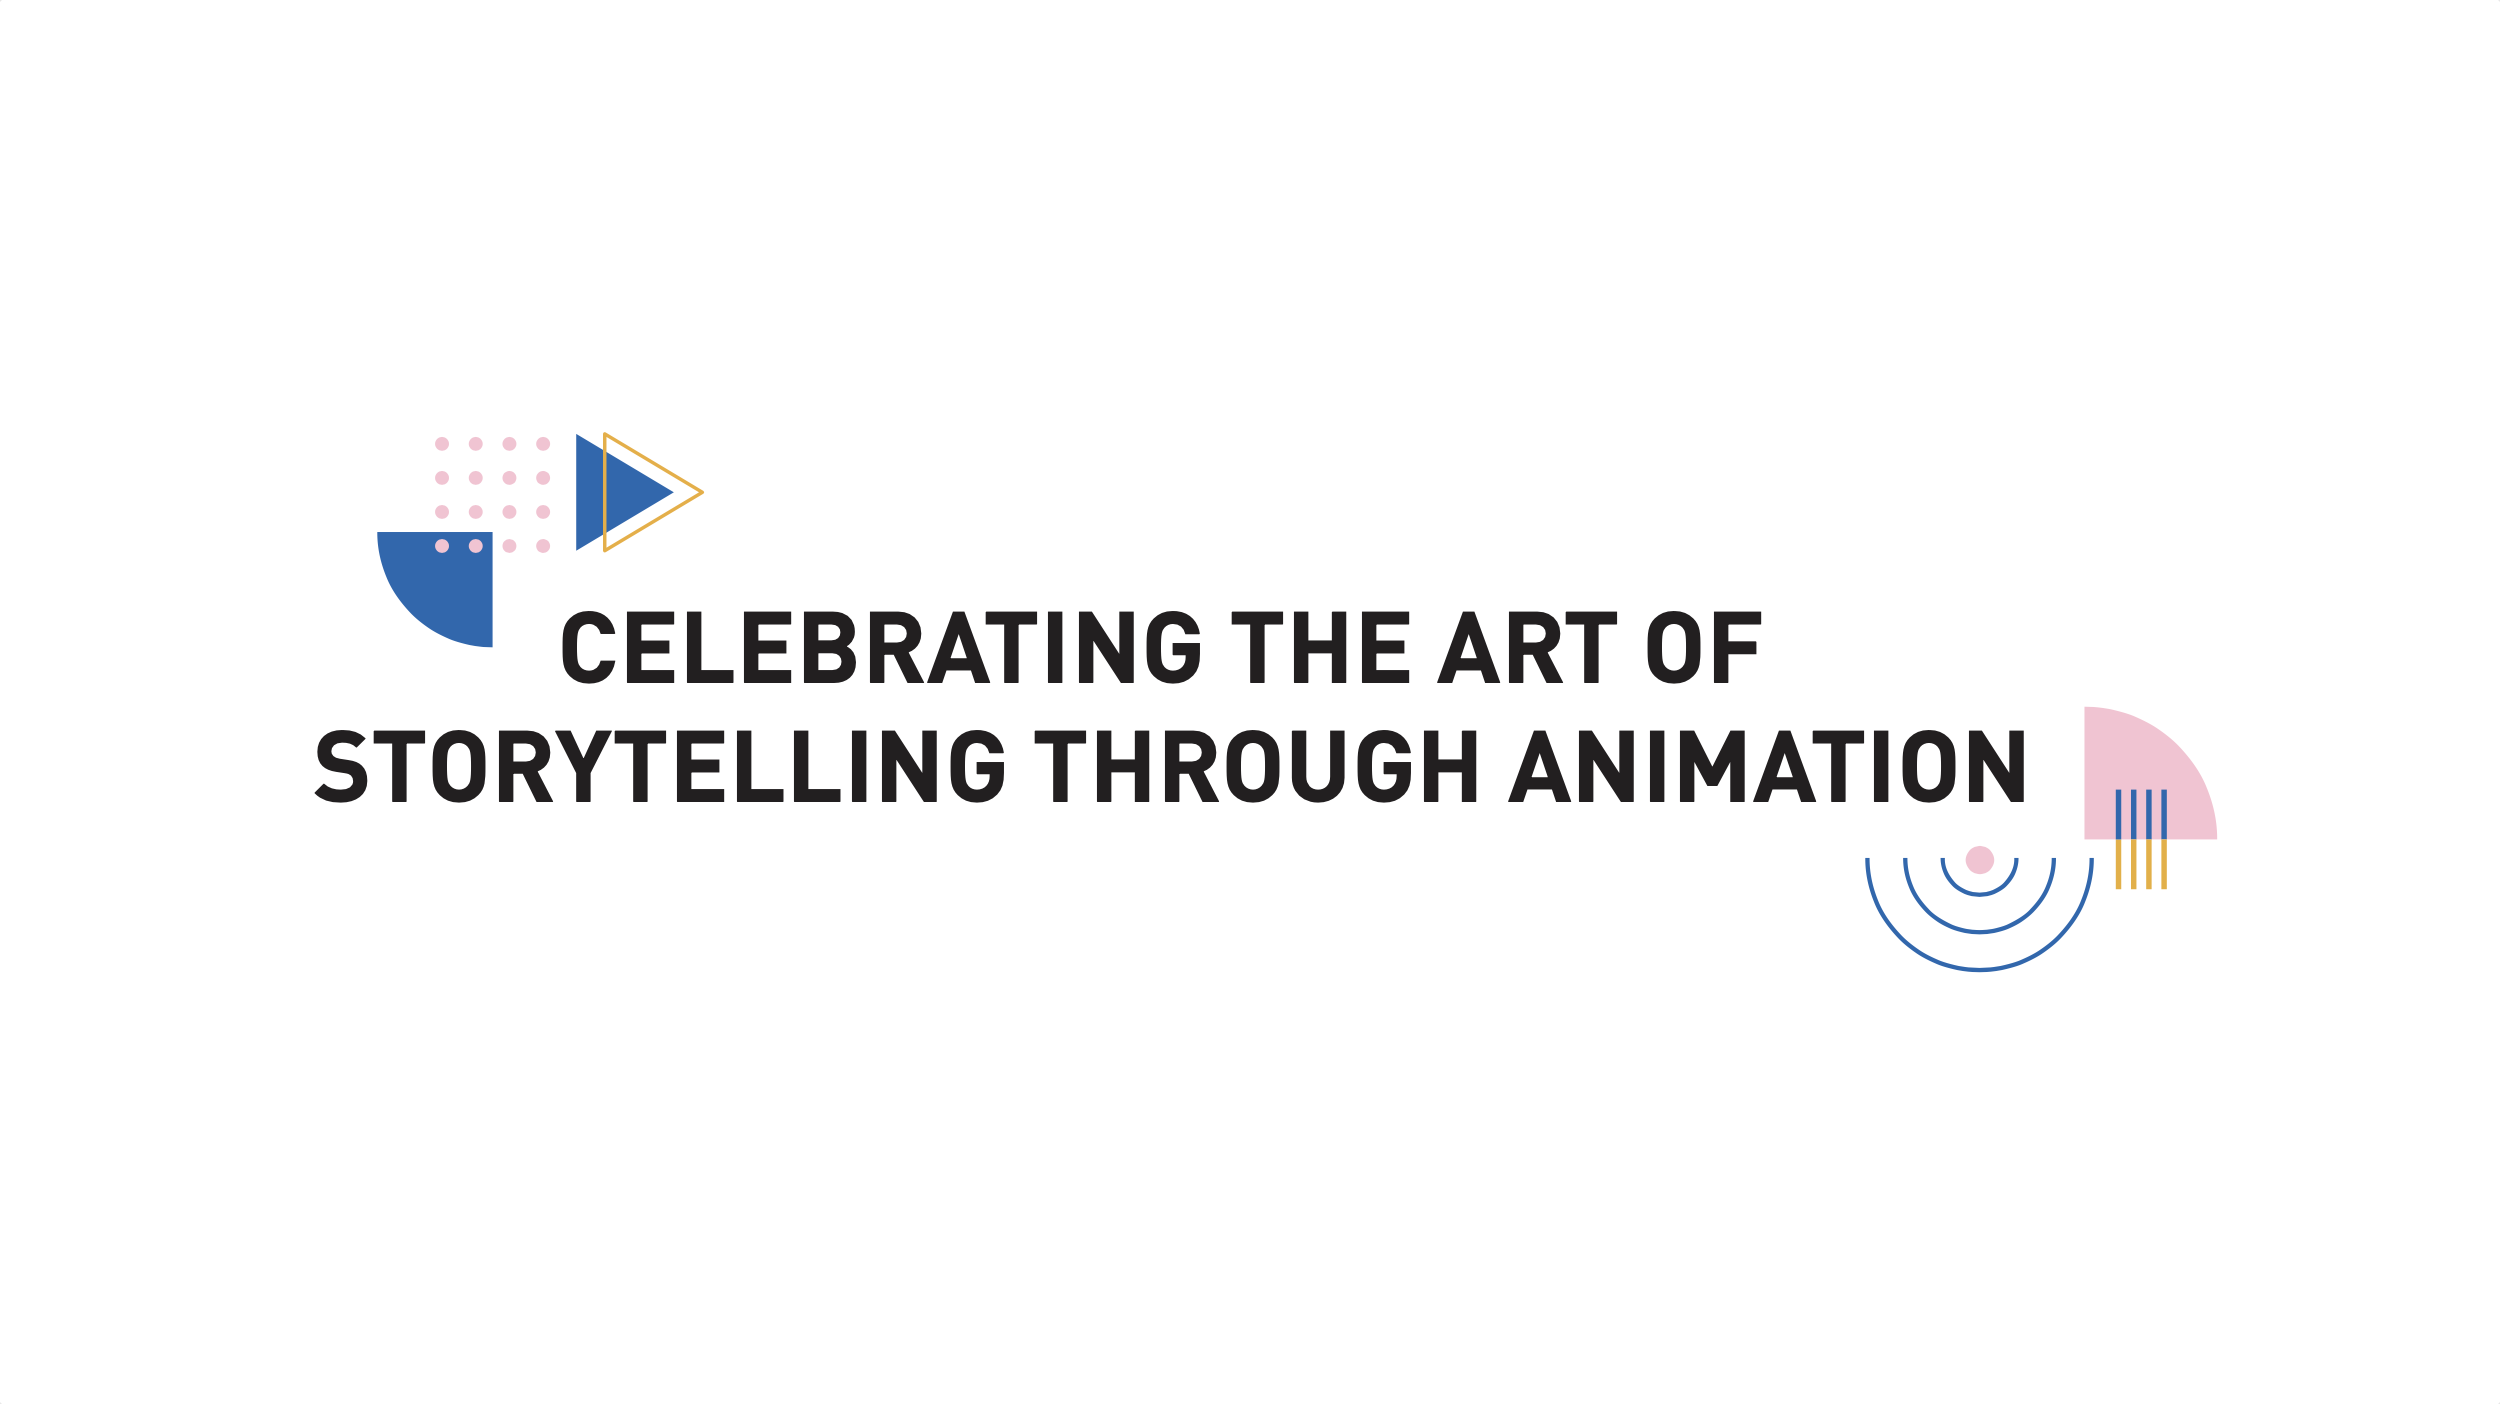 Creating Global Animated Videos for LinkedIn, by BlueMelon